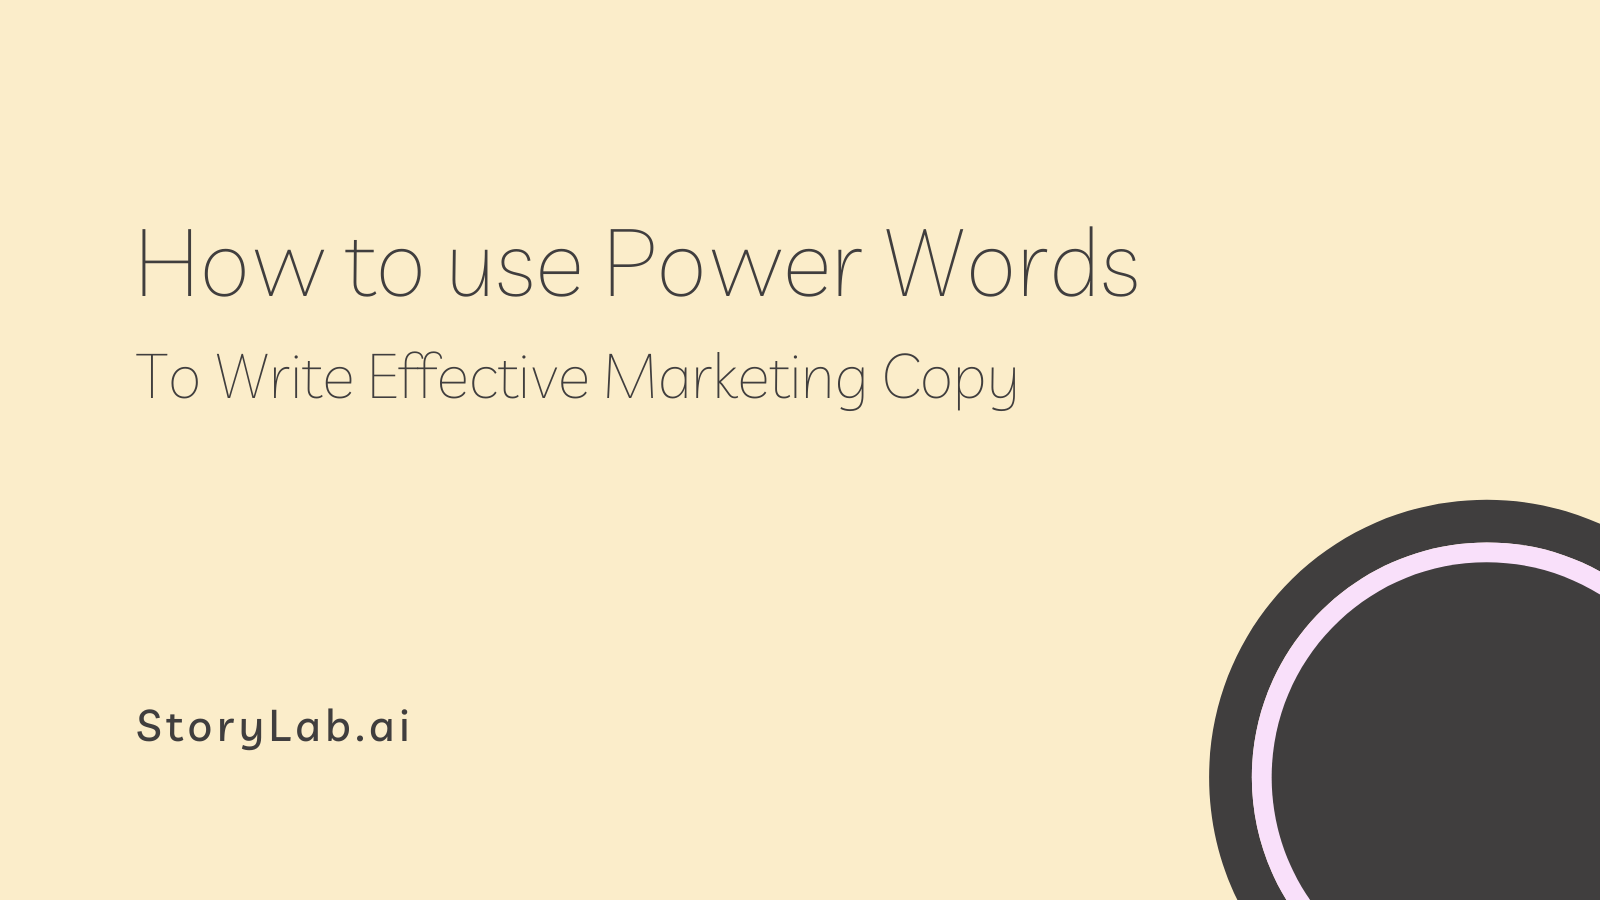 How to use Power Words to Write Effective Marketing Copy